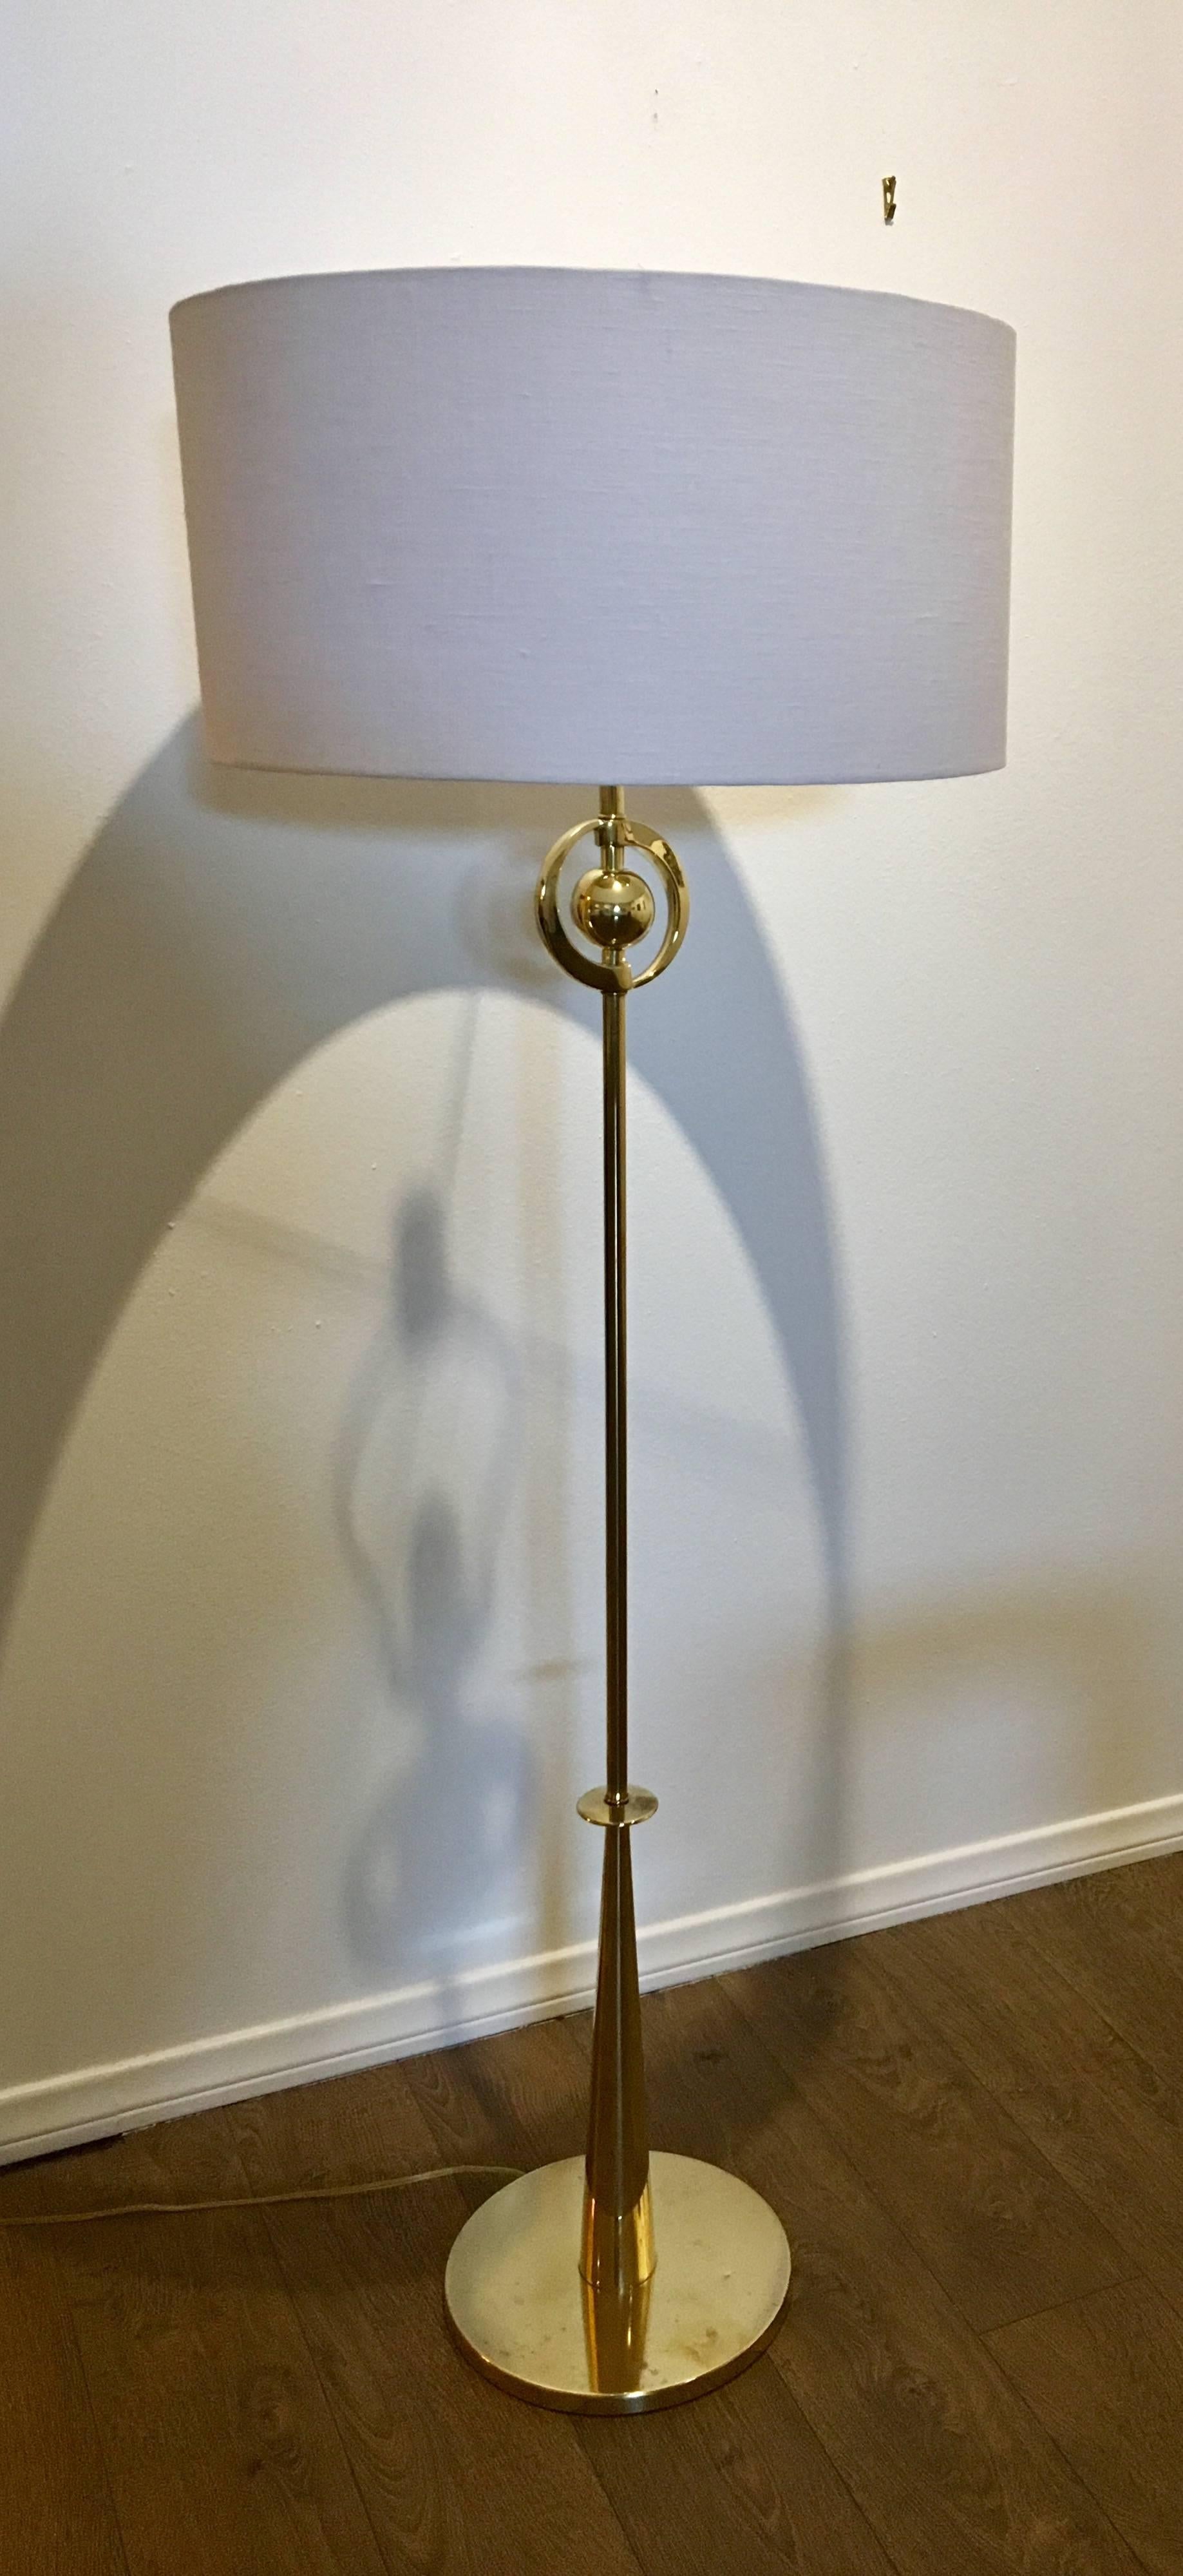 American Art Deco Polished Brass Floor Lamp by the Rembrandt Lamp Company